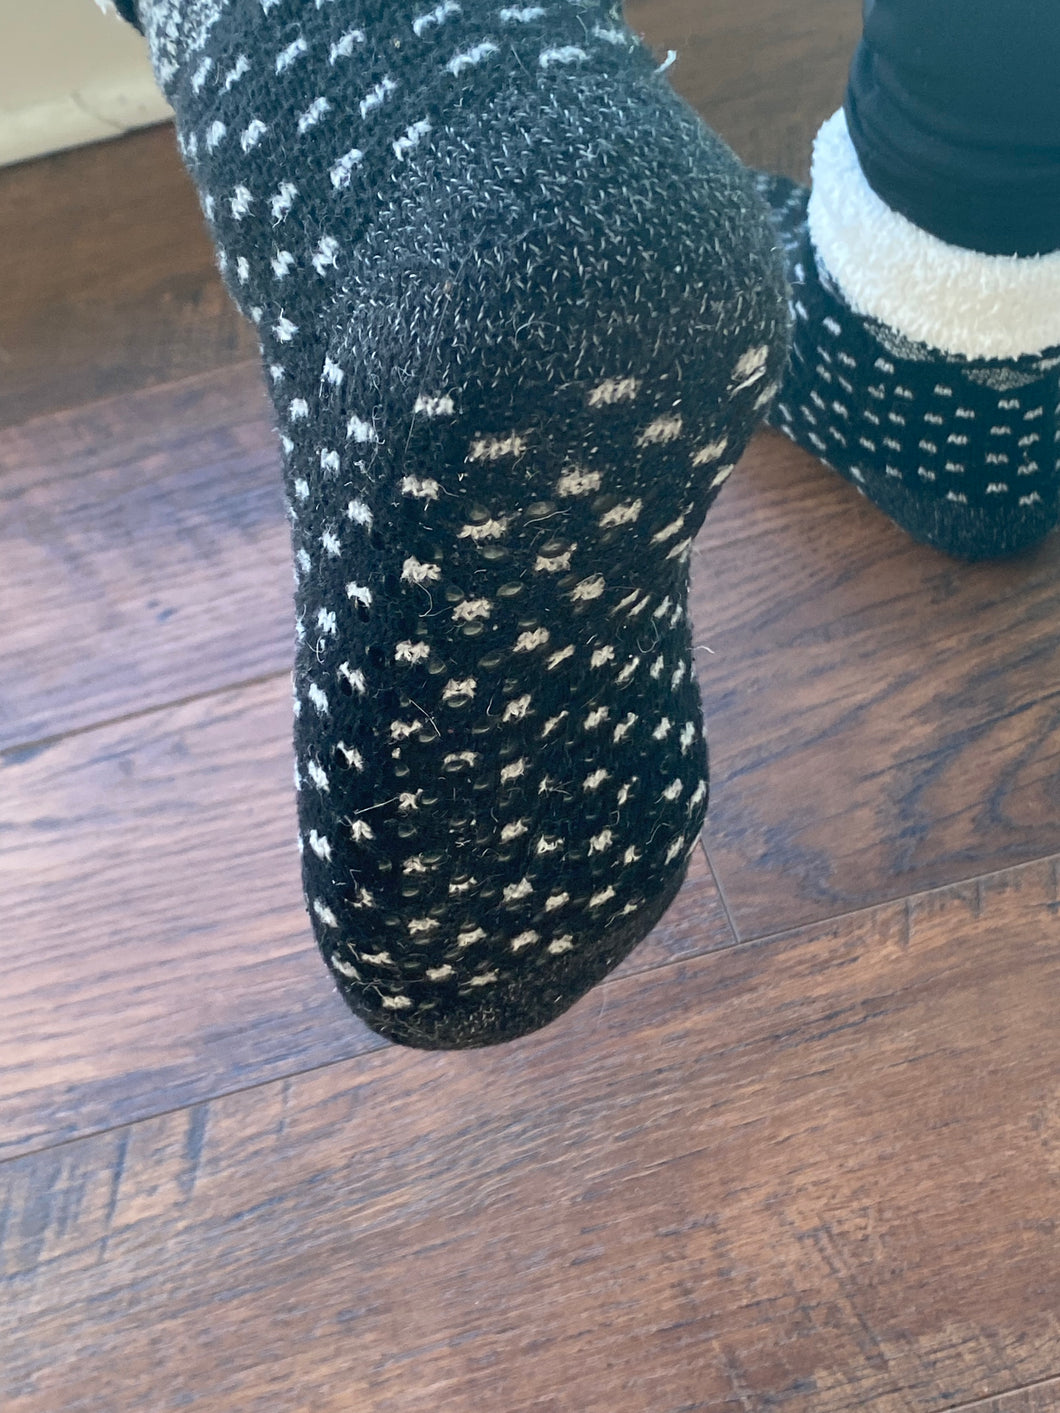 Bottom of a person's foot wearing a black sock with white dots. Grippers are there but not very visible